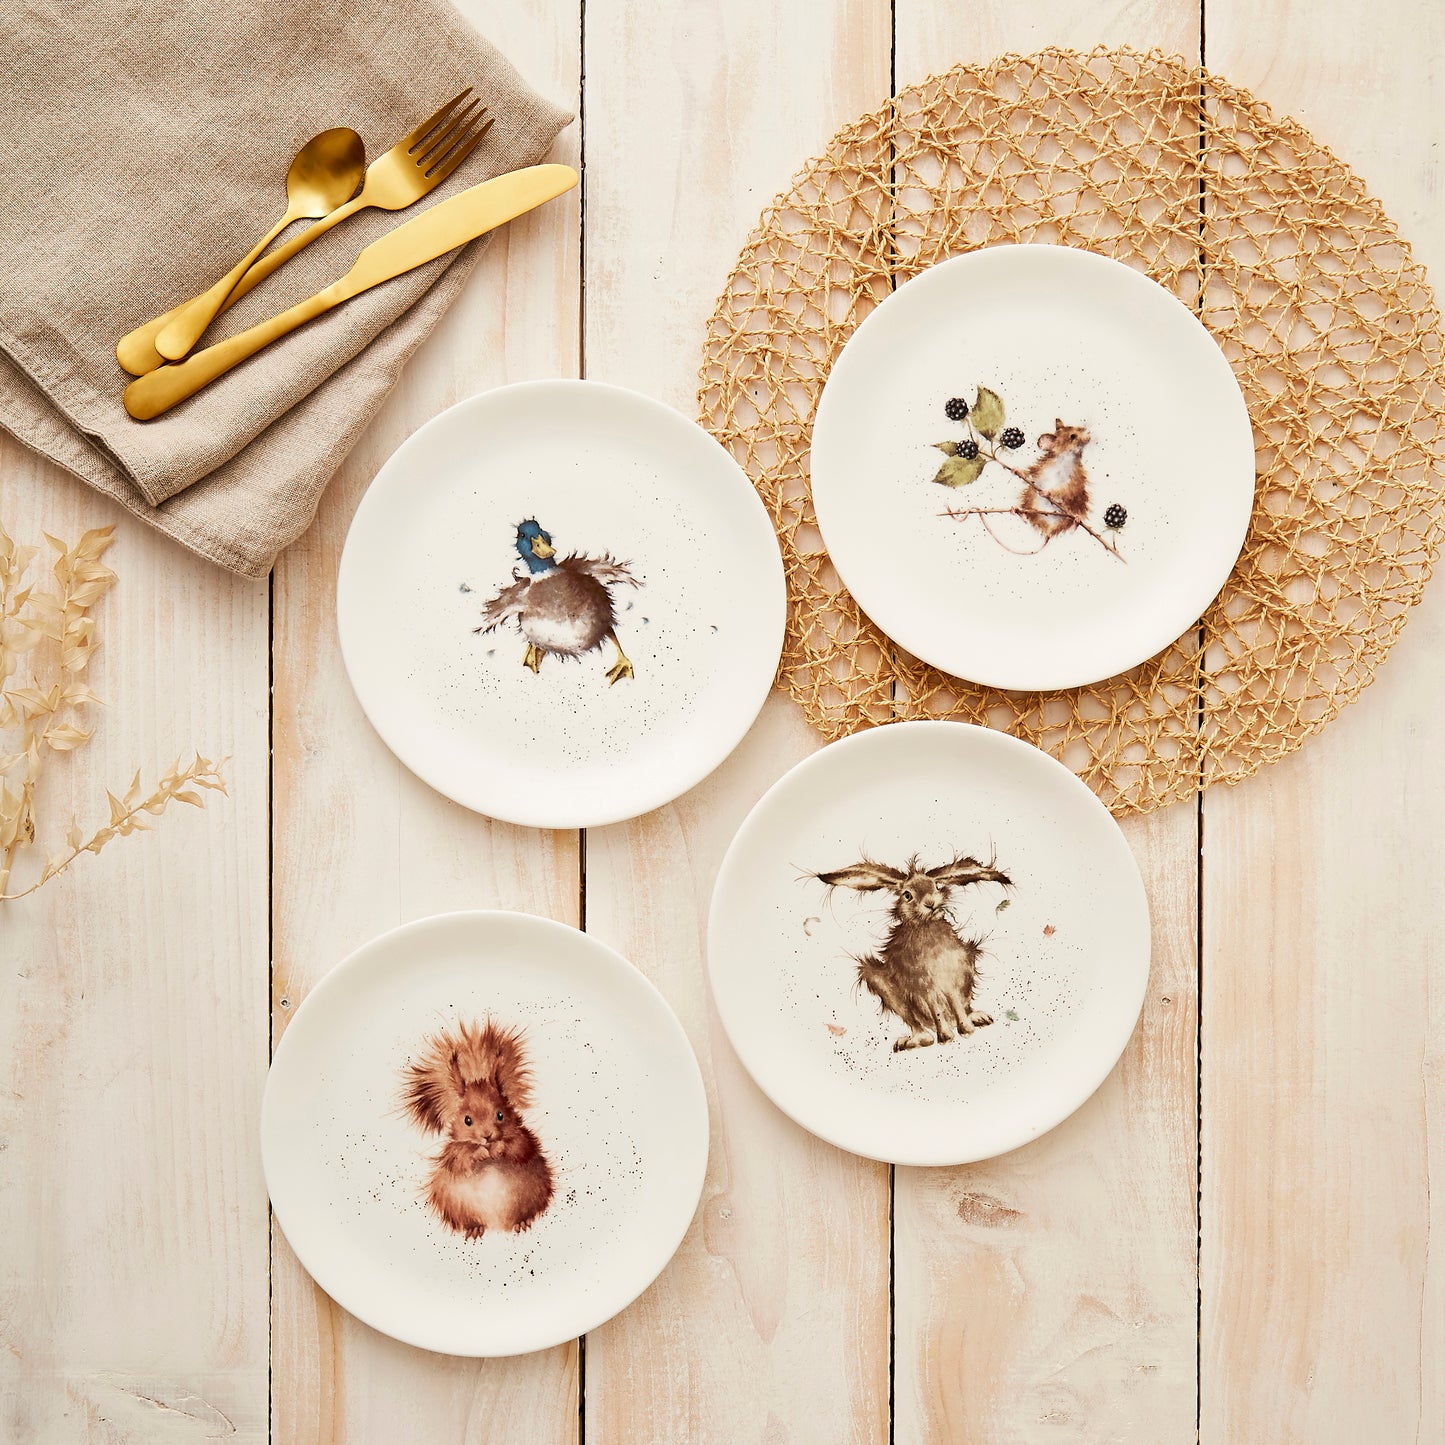 Royal Worcester Wrendale Designs 8 Inch Coupe plates Set of 4 Hare, Duck, Mouse & Squrriel